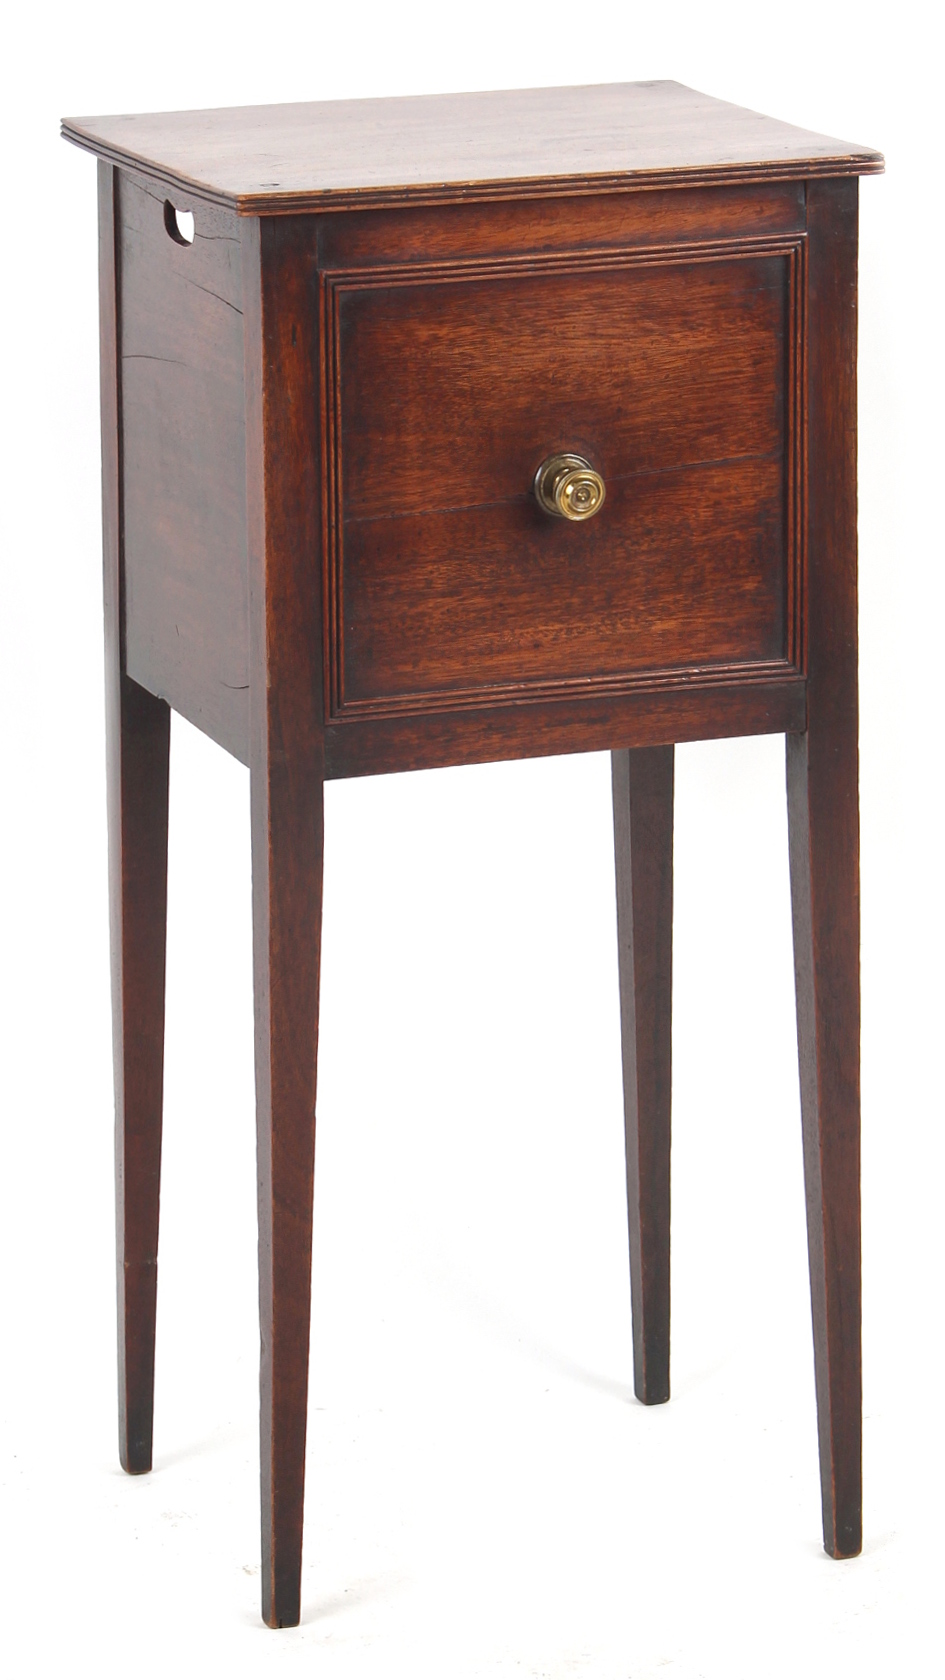 Property of a lady - an early 19th century George IV mahogany pot cupboard, with open back, on